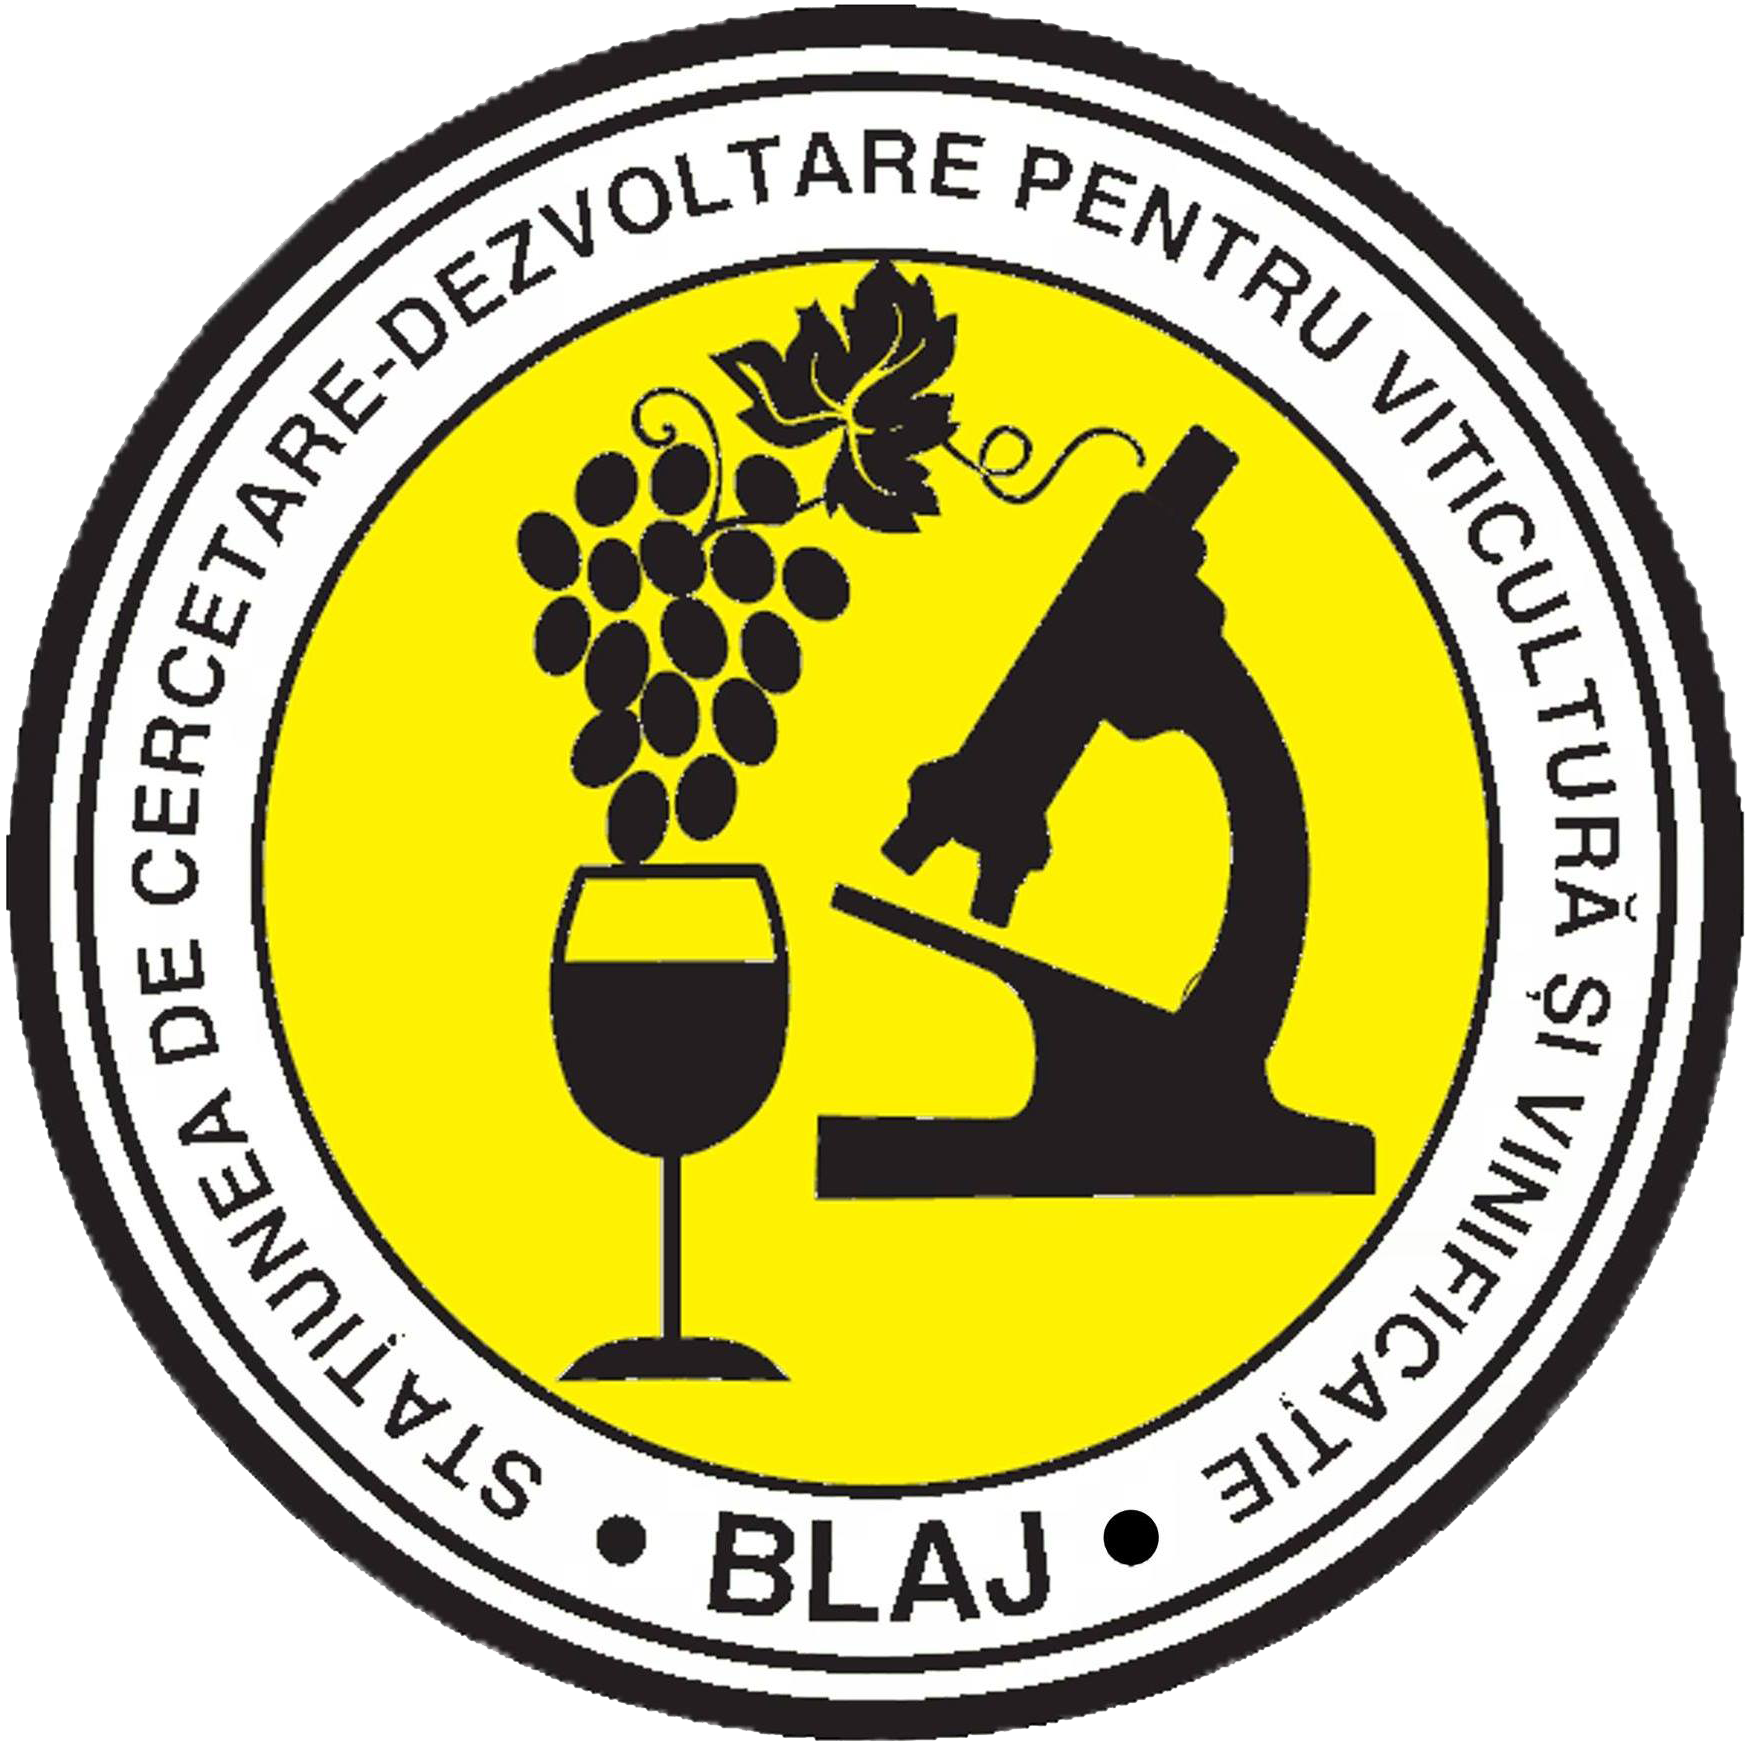 Research And Development Station For Viticulture And Vinification Blaj